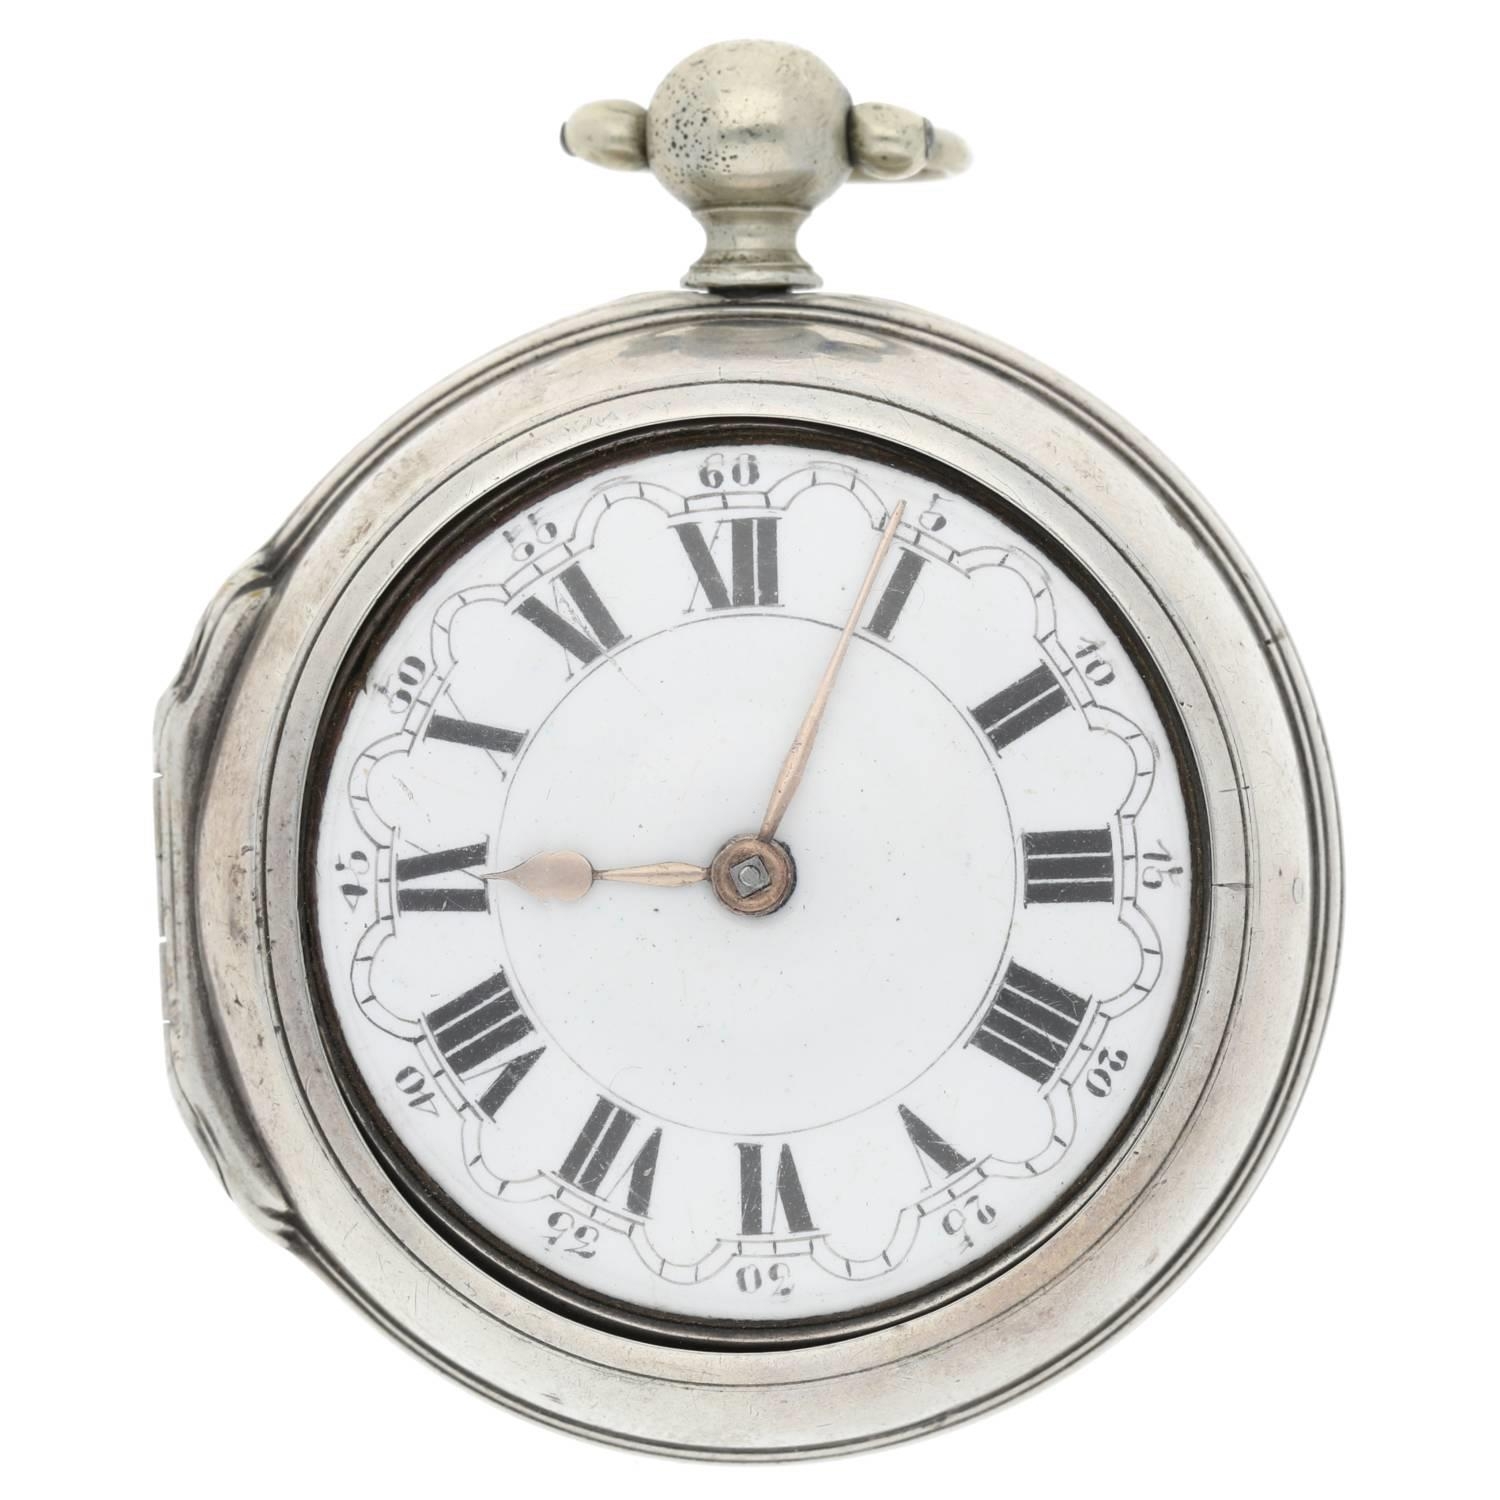 William Knight, West Marden - mid-18th century English silver pair cased verge pocket watch, - Image 2 of 10